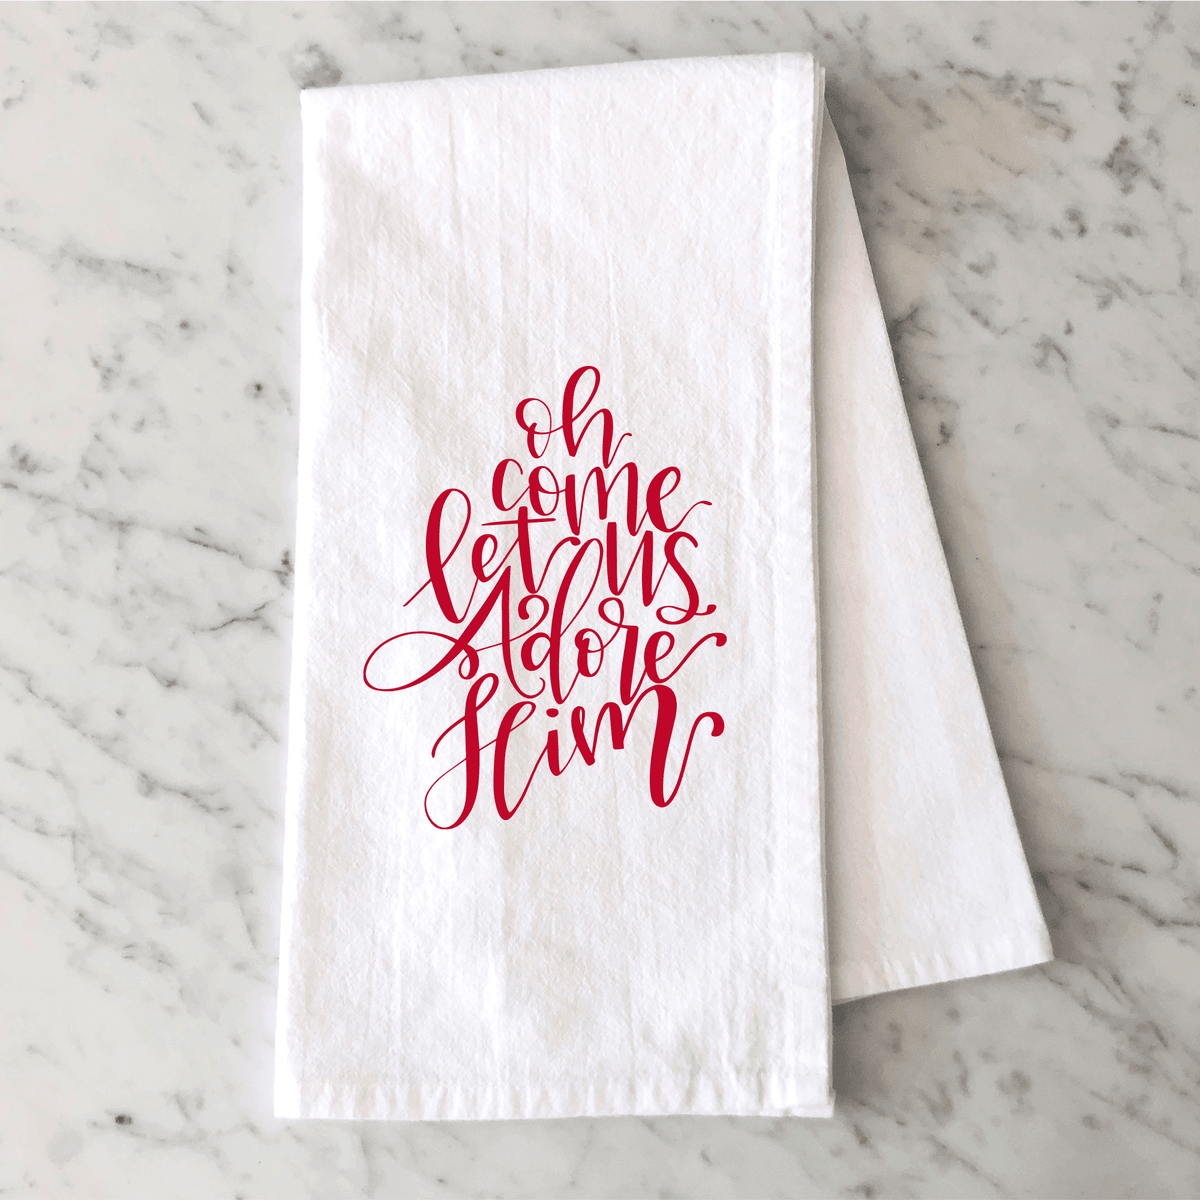 Christmas Pattern Dish Towels, Soft Absorbent Kitchen Towels, Red